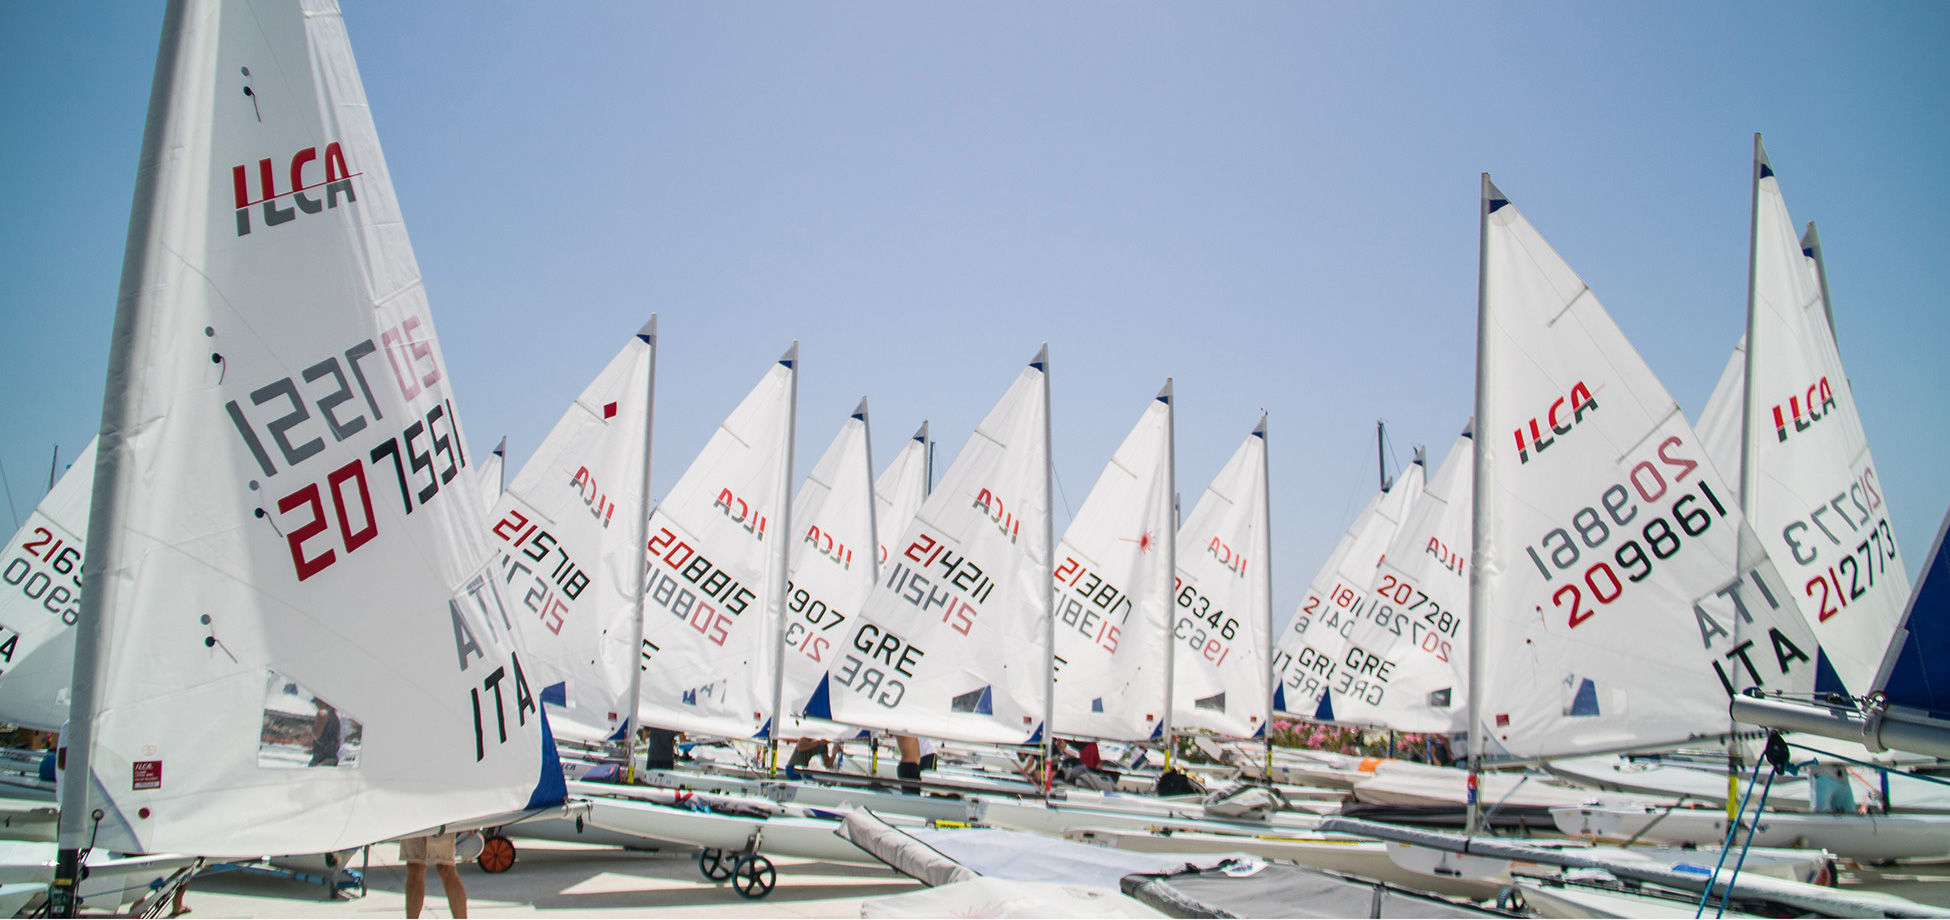 Applications open 2022 EurILCA 6 Youth Europeans